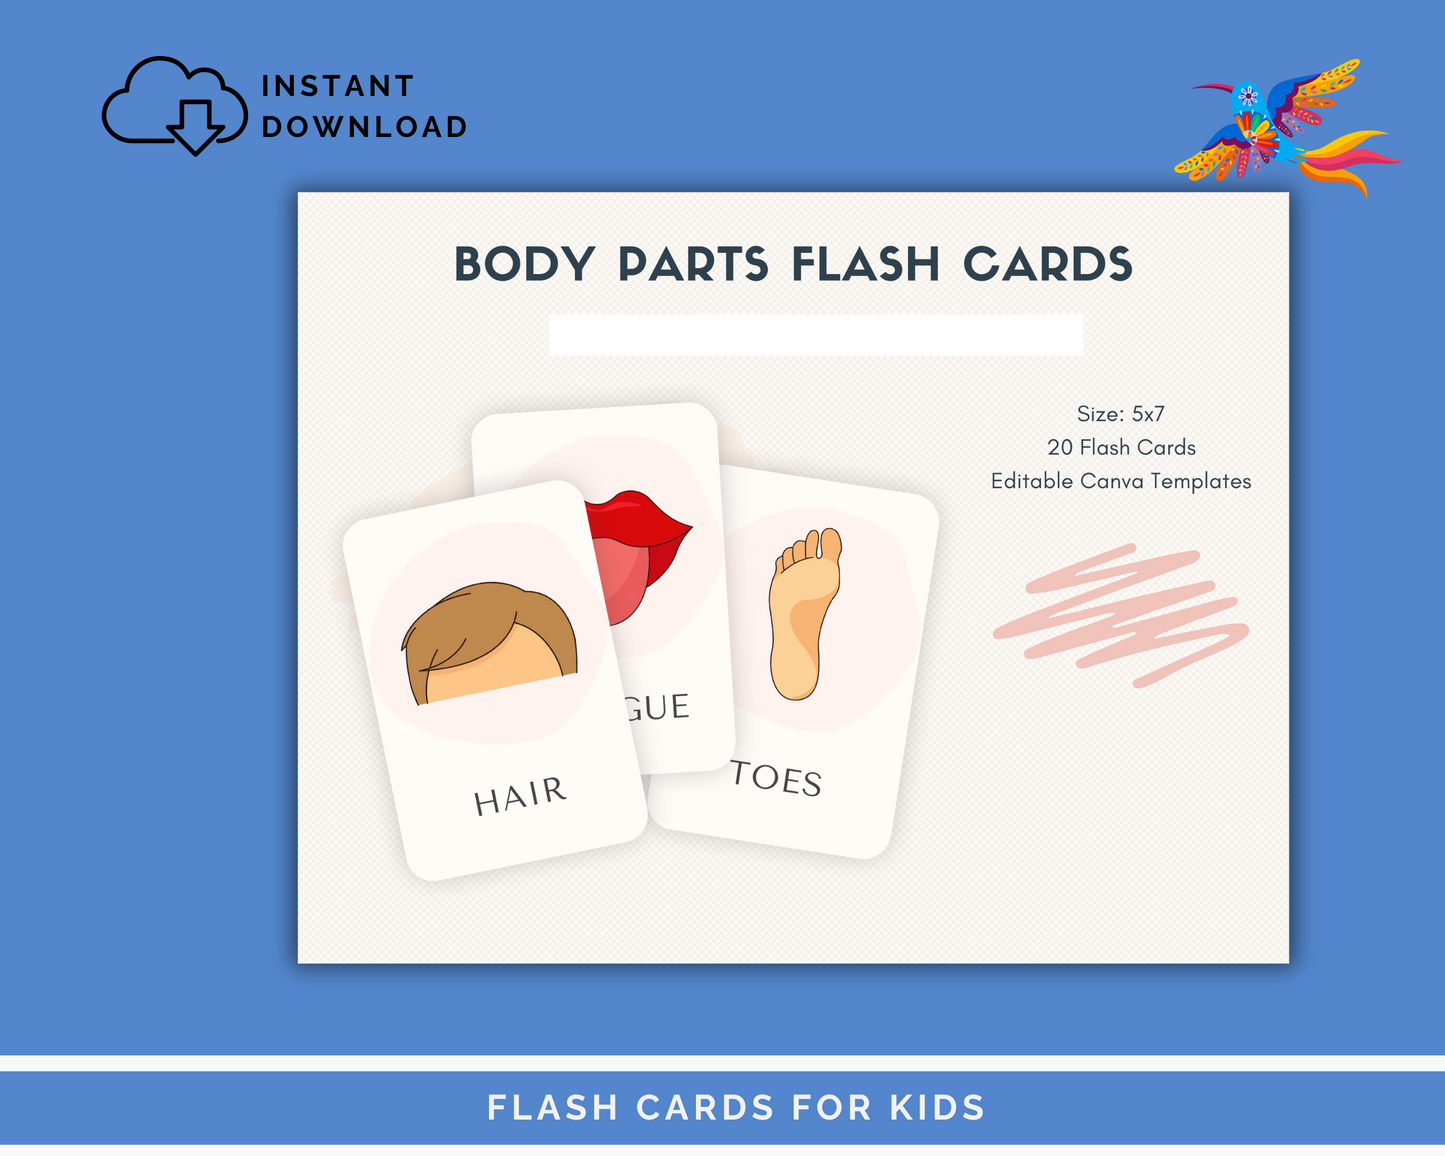 Body Parts Flashcards - 20 Printable Cards for Early Learning